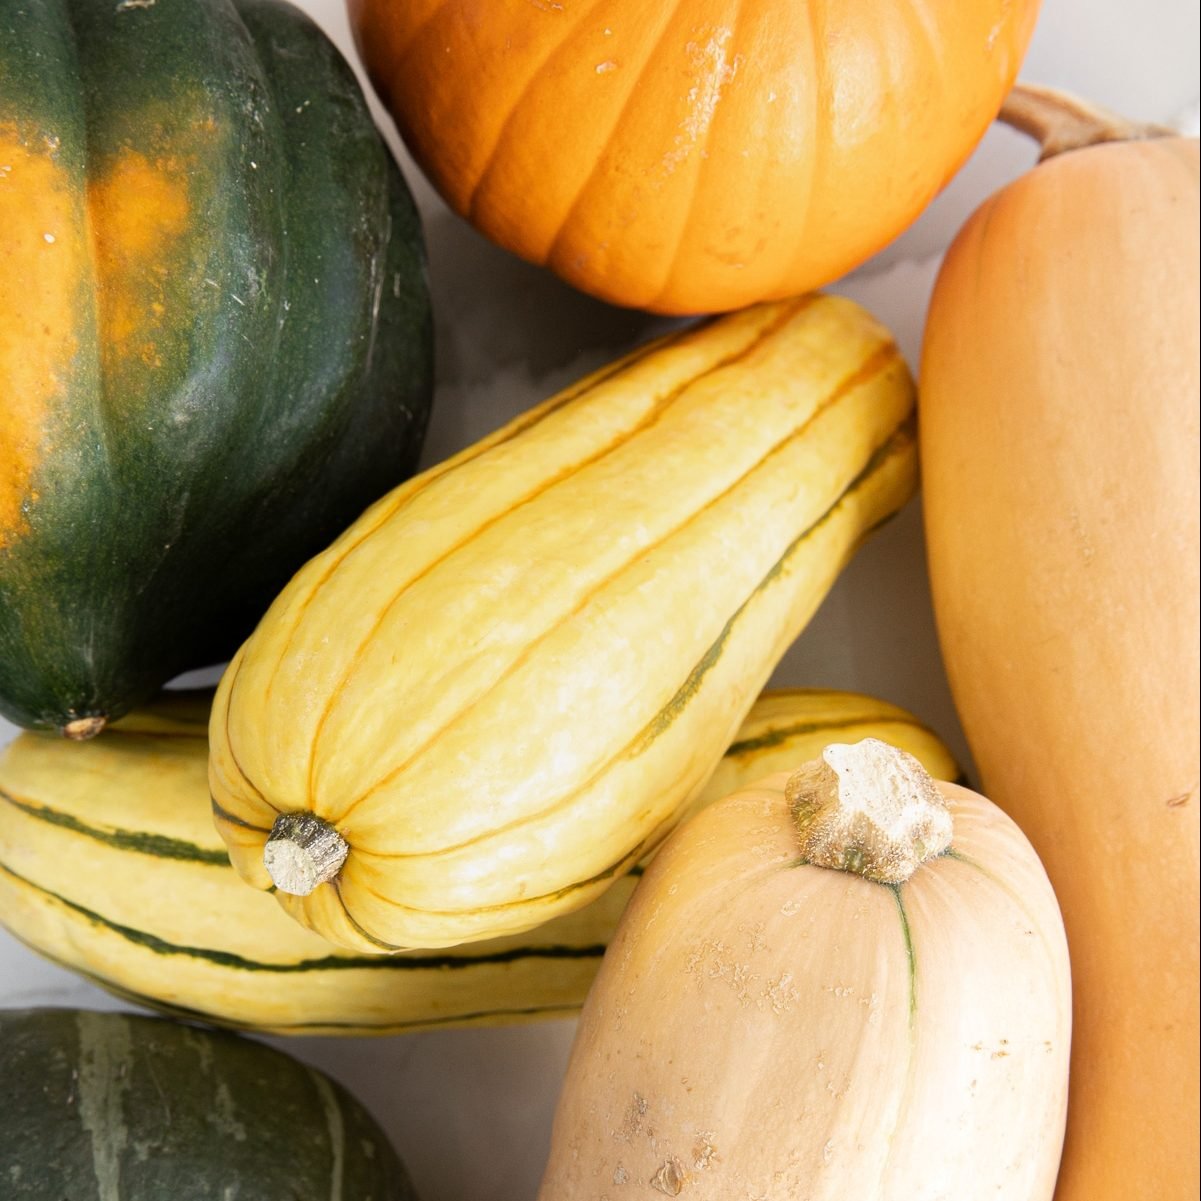 How Many Types Of Squash